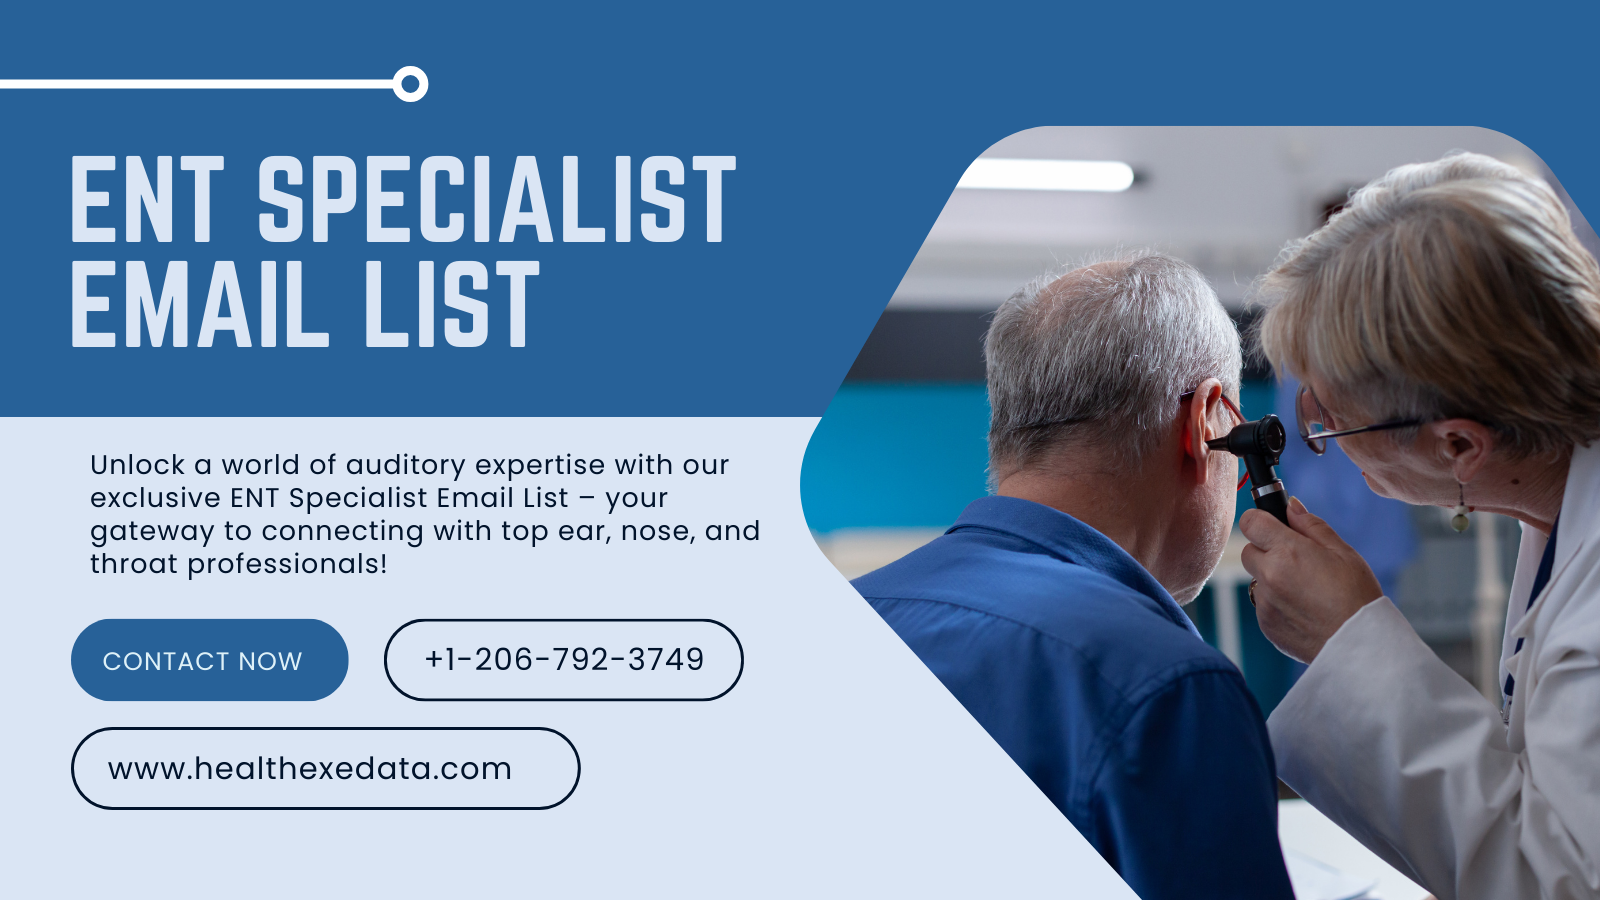 ent specialist email list 2 WingsMyPost